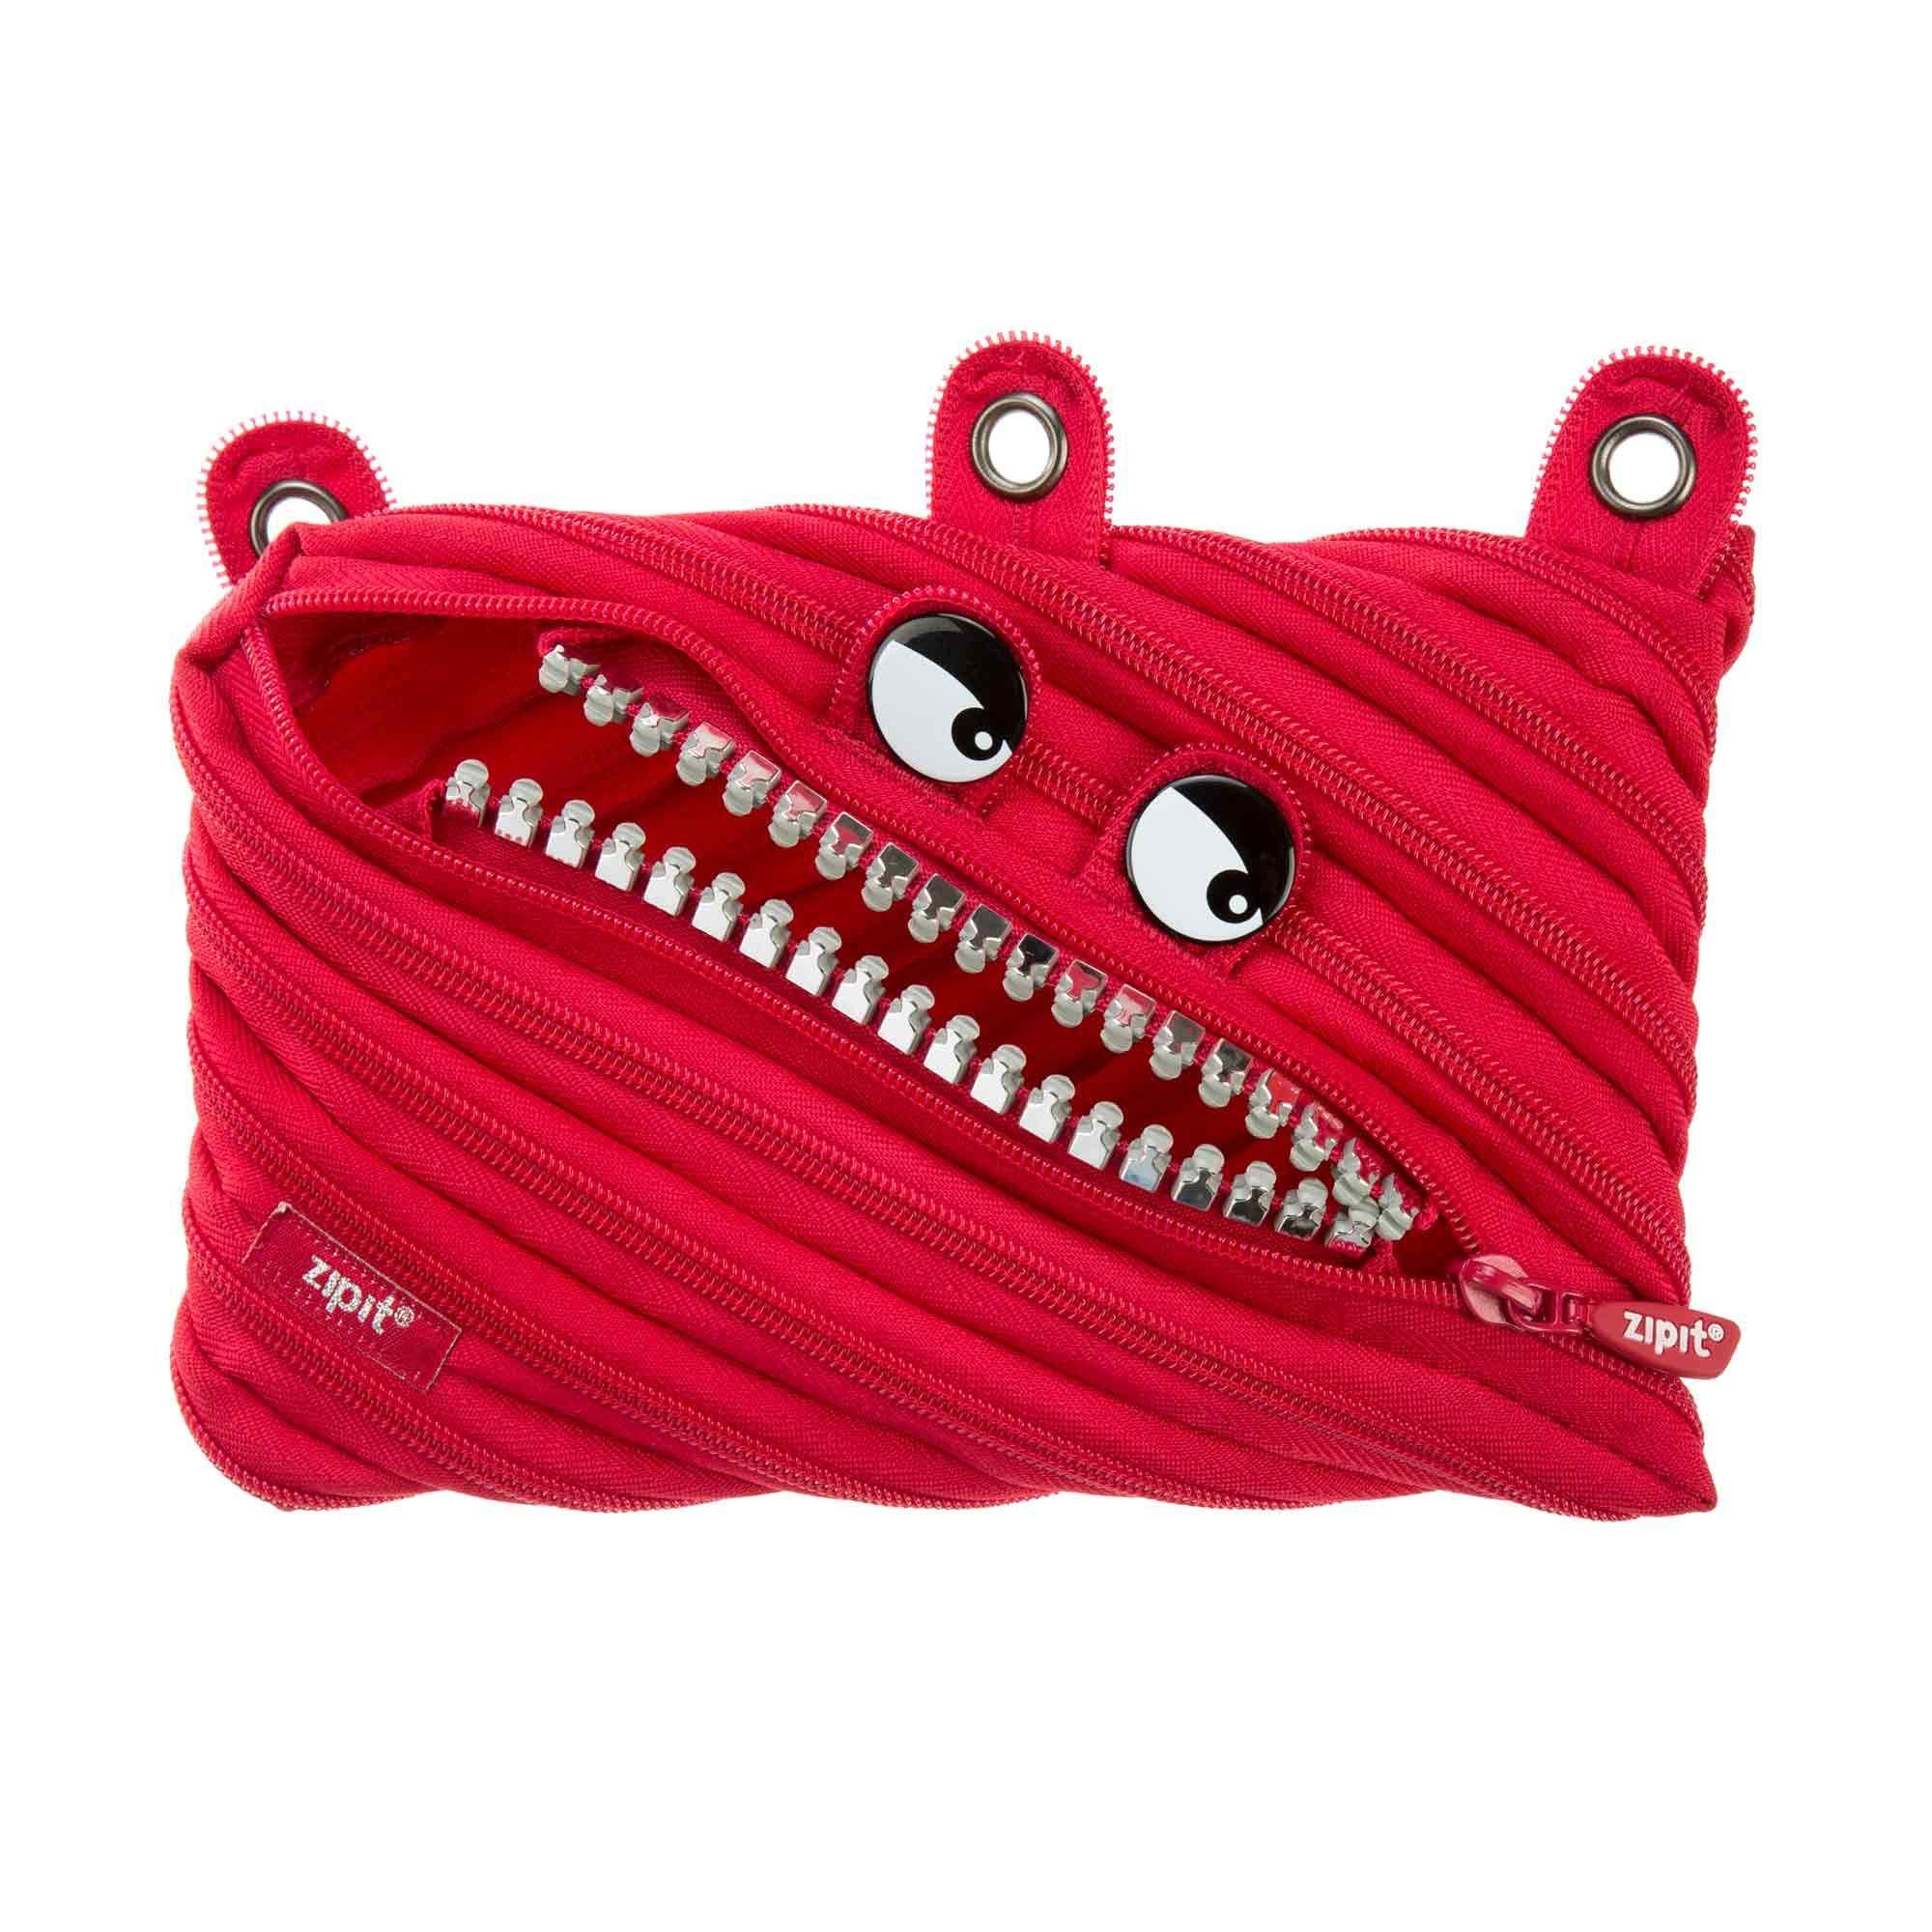 ZIPIT Talking Monstar Monster Talking 3 Ring Pouch Green Pencil Pouch  Grizzle